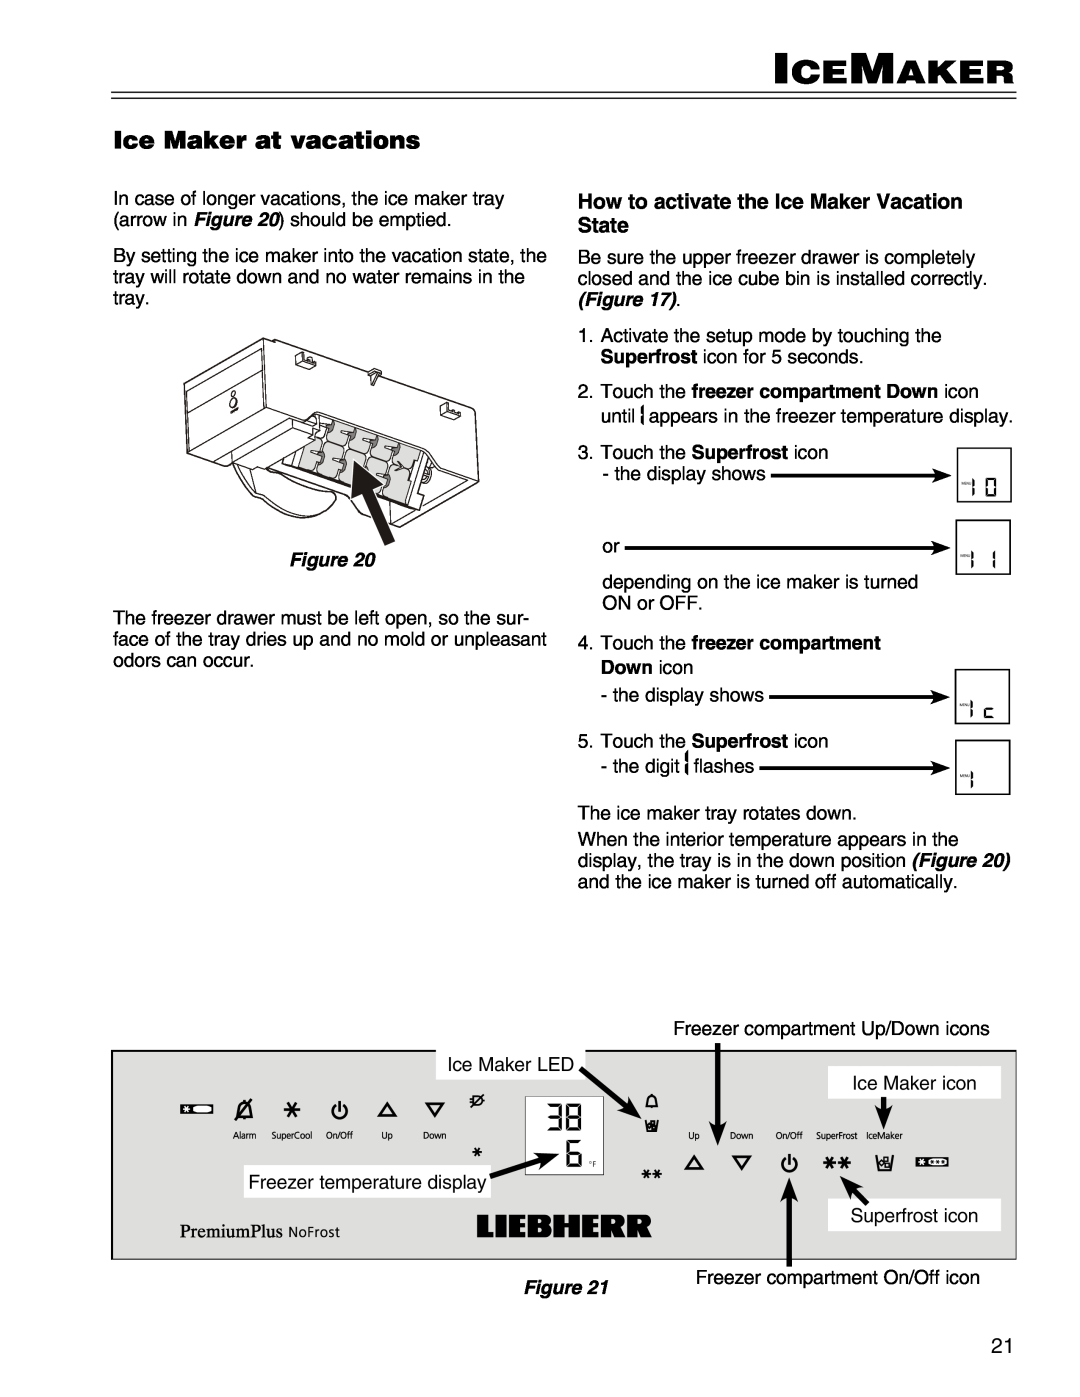 Liebherr 7081 411-01, HCS manual Ice Maker at vacations, How to activate the Ice Maker Vacation State, IceMaker 